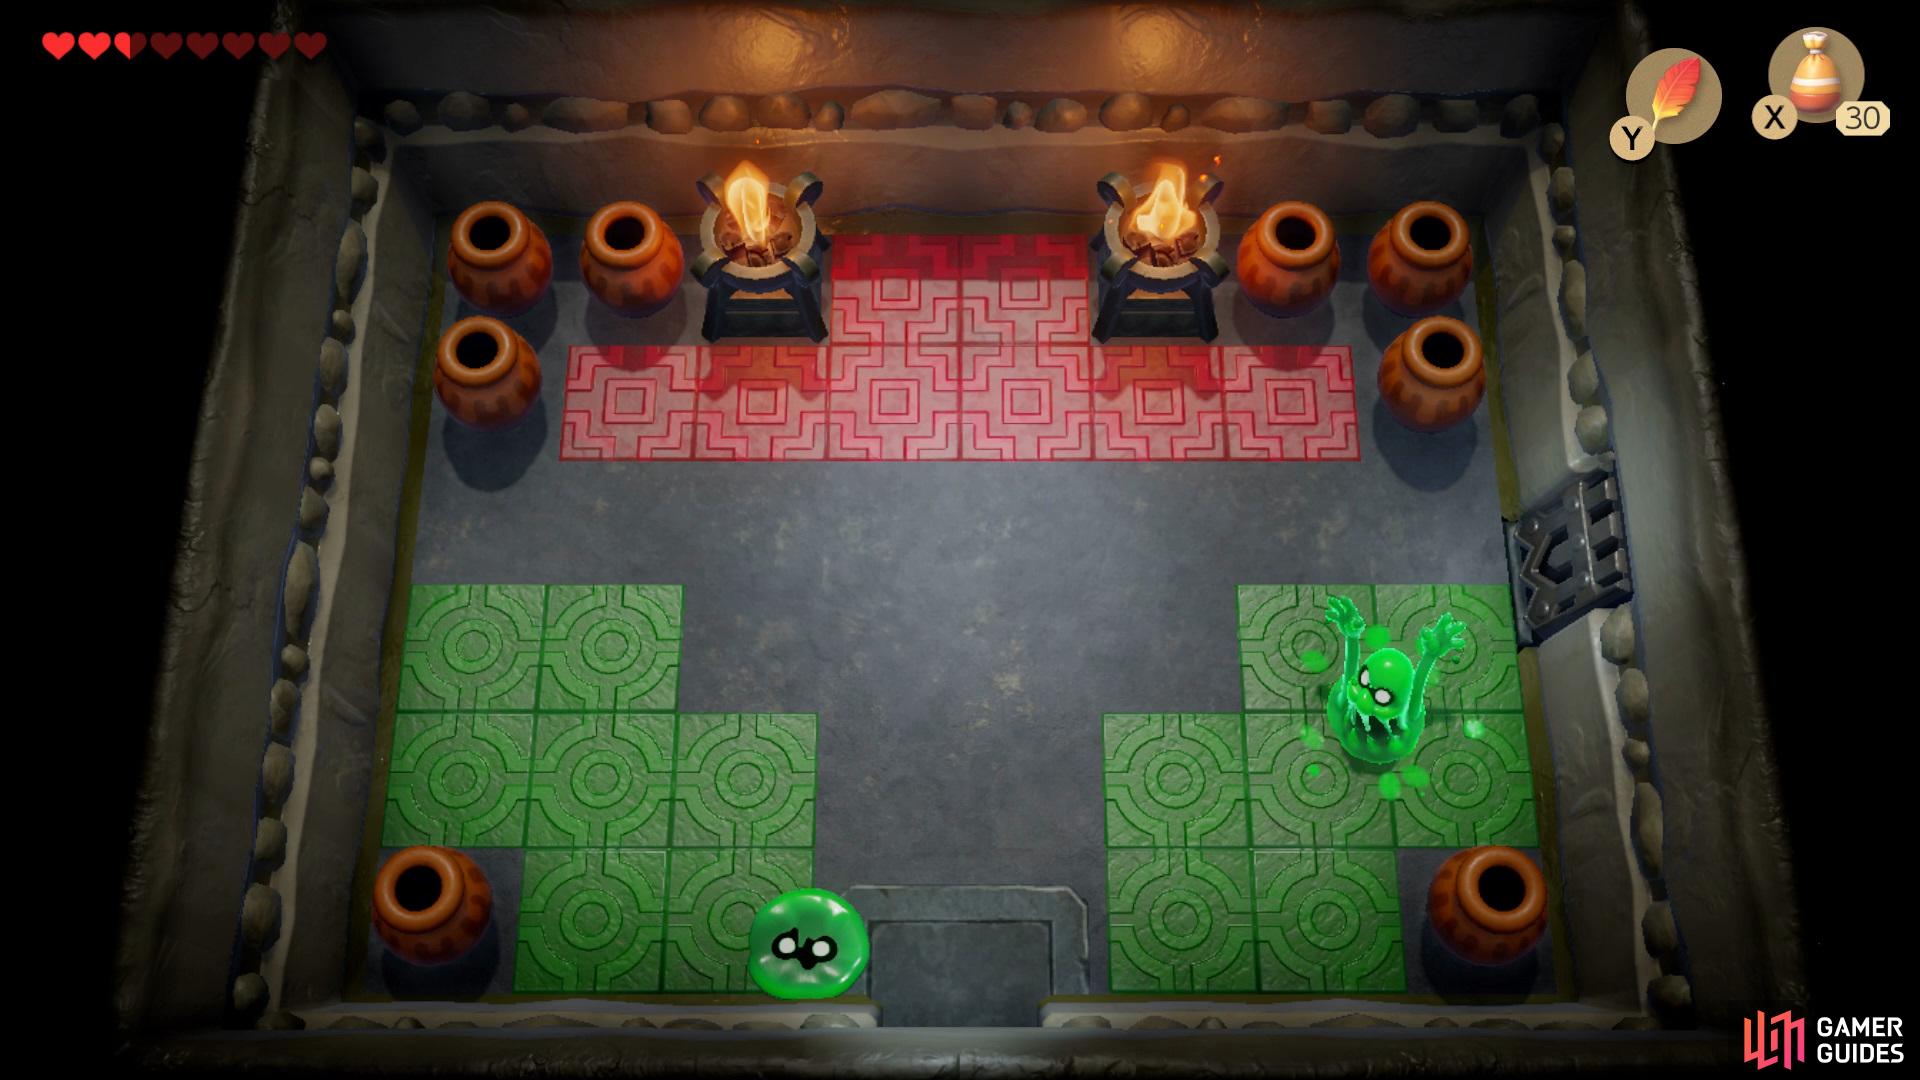 Take out the Color Ghosts when they appear above ground then enter the room on the right,